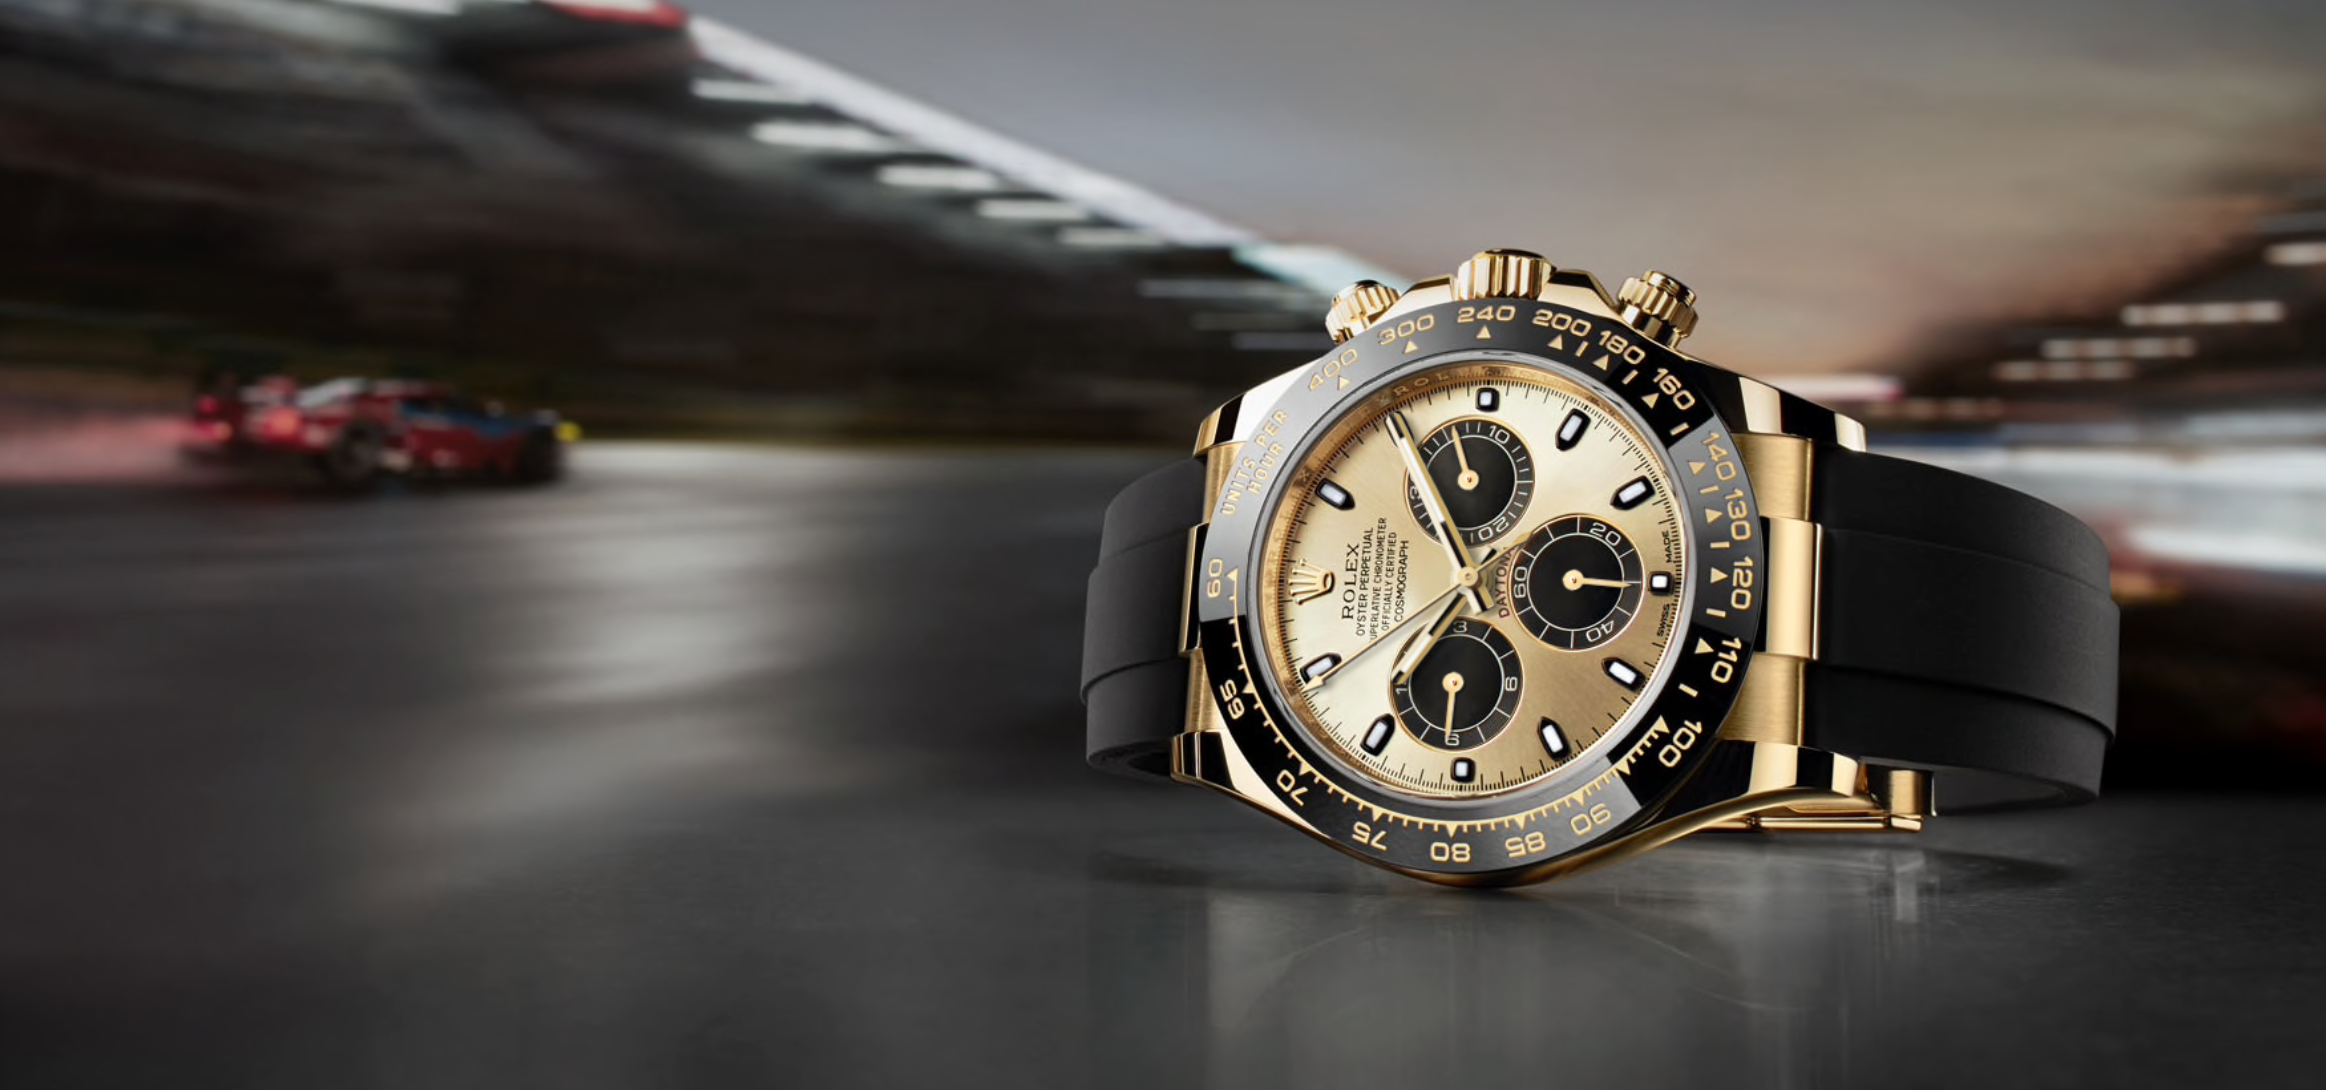 Rolex Cosmograph Daytona Top Selling Luxury Watches of 2018